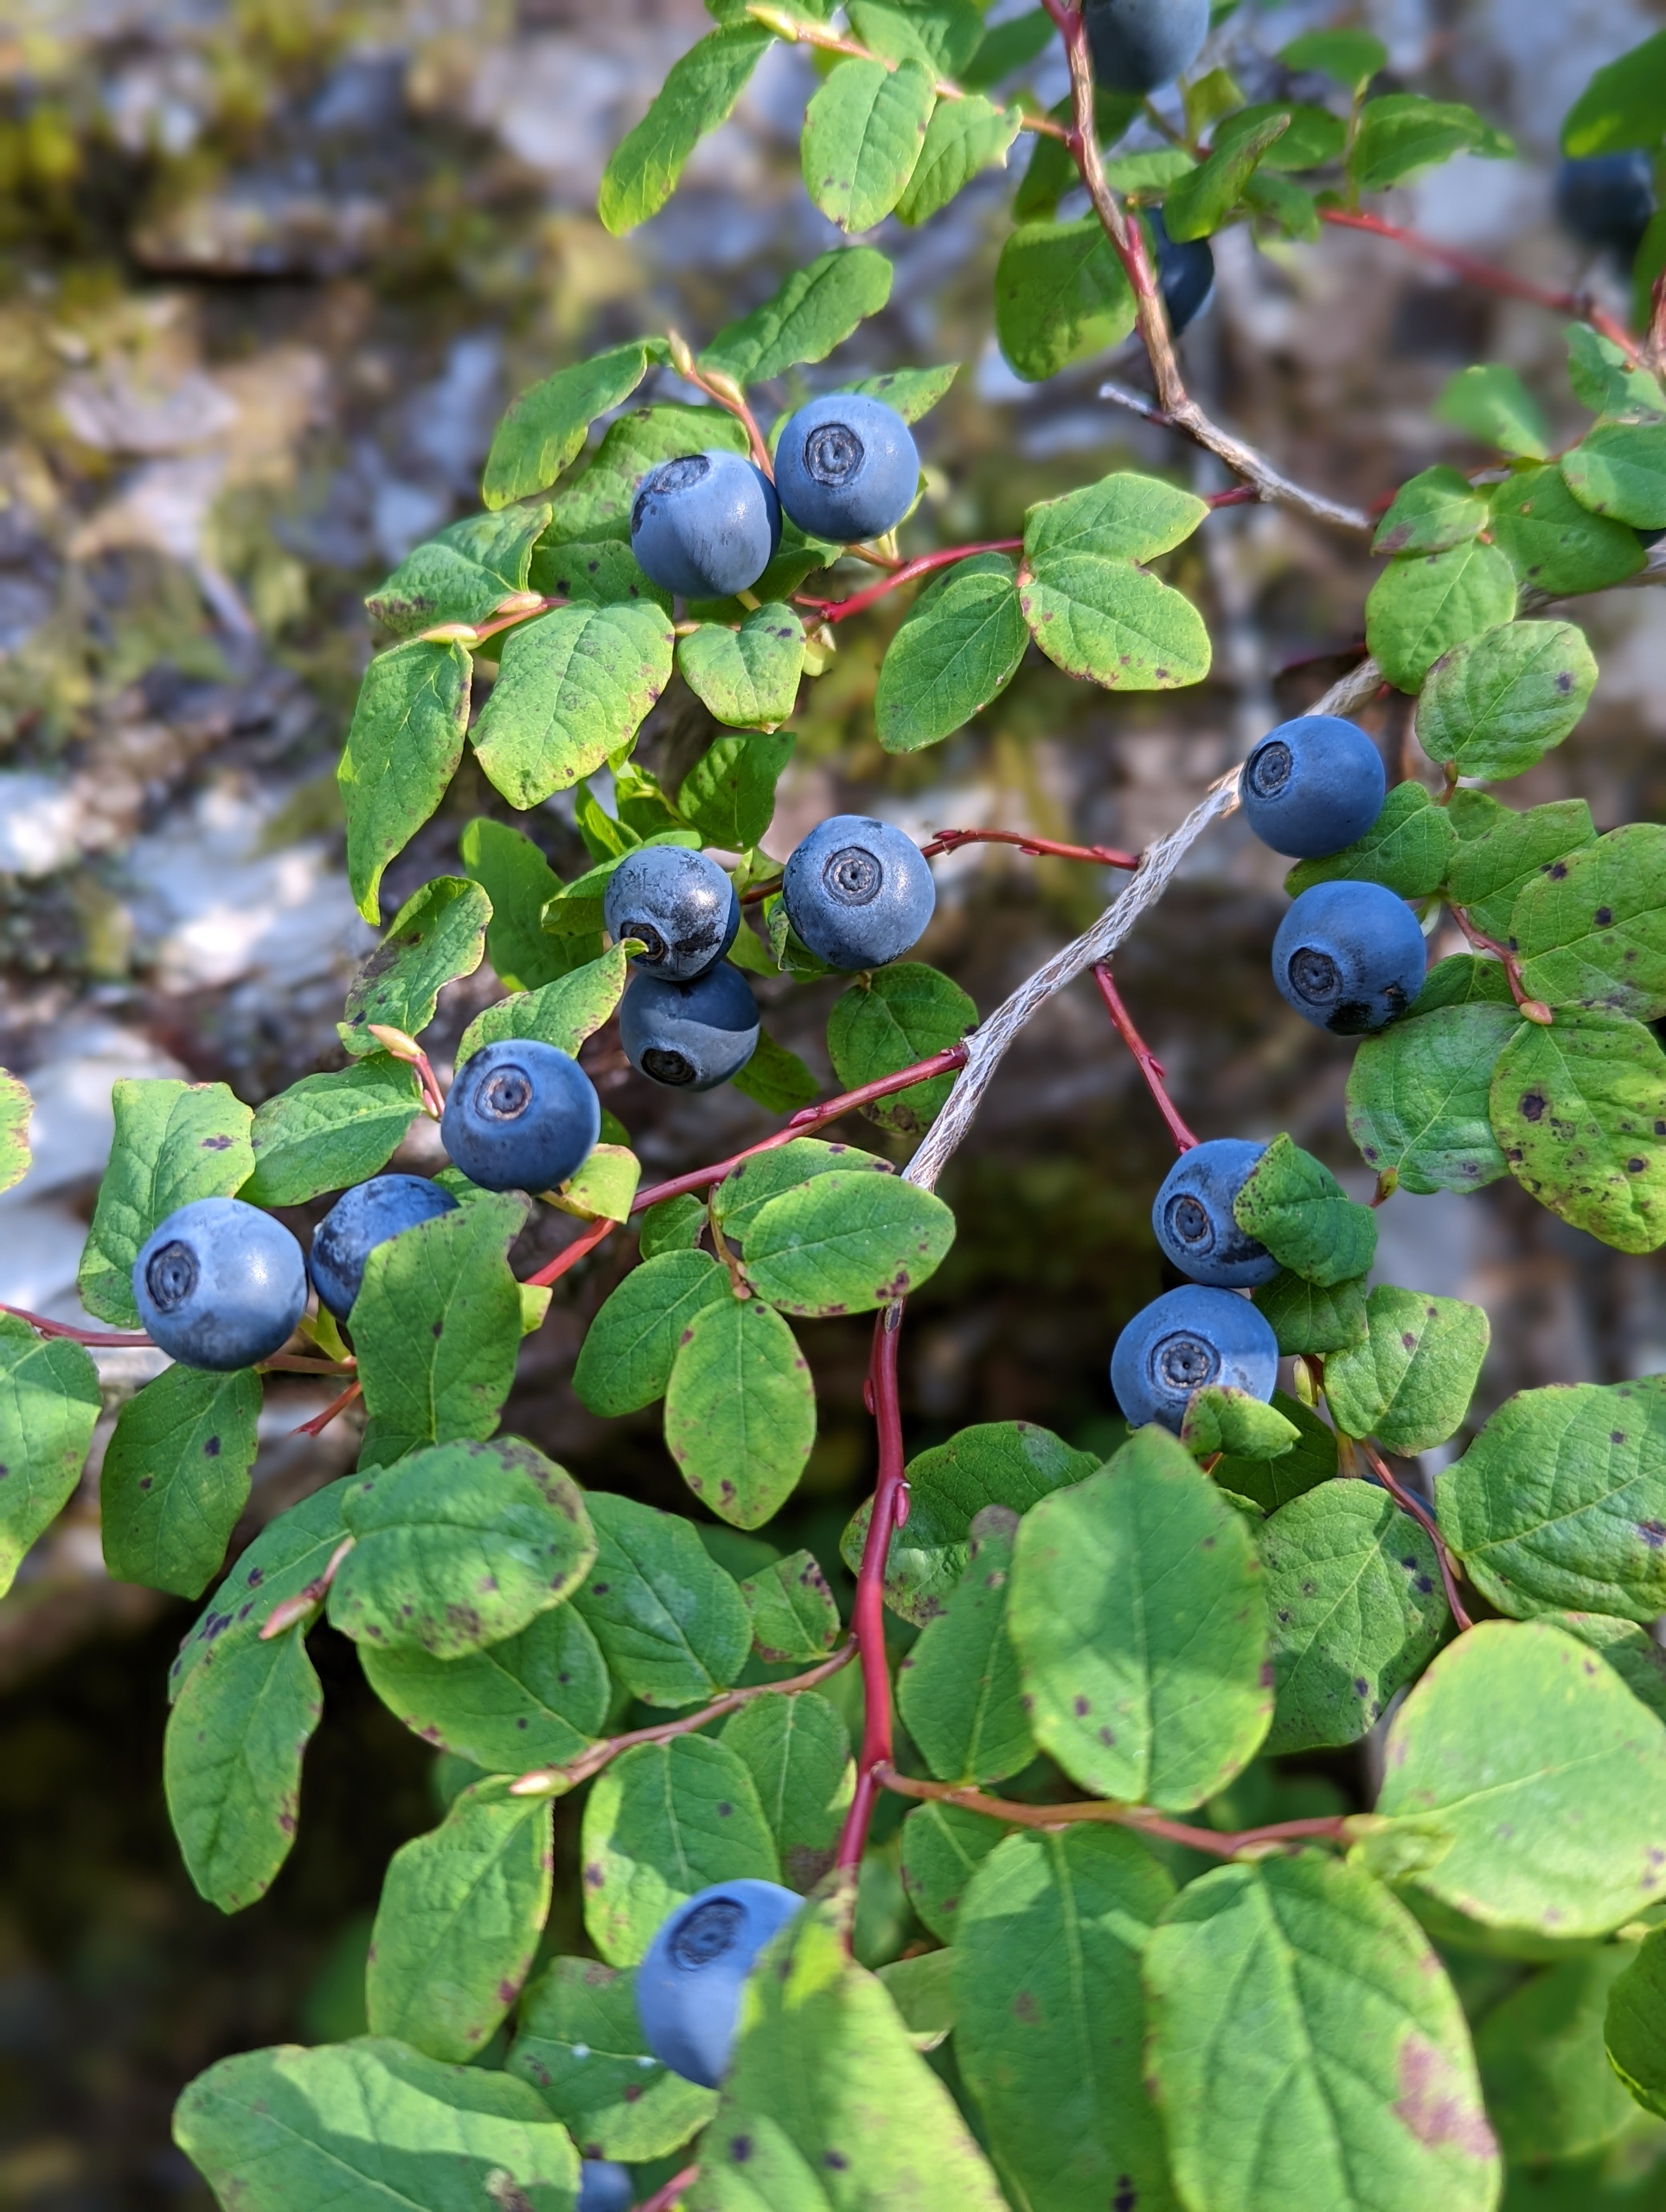 Blueberries on a bush with green leaves.